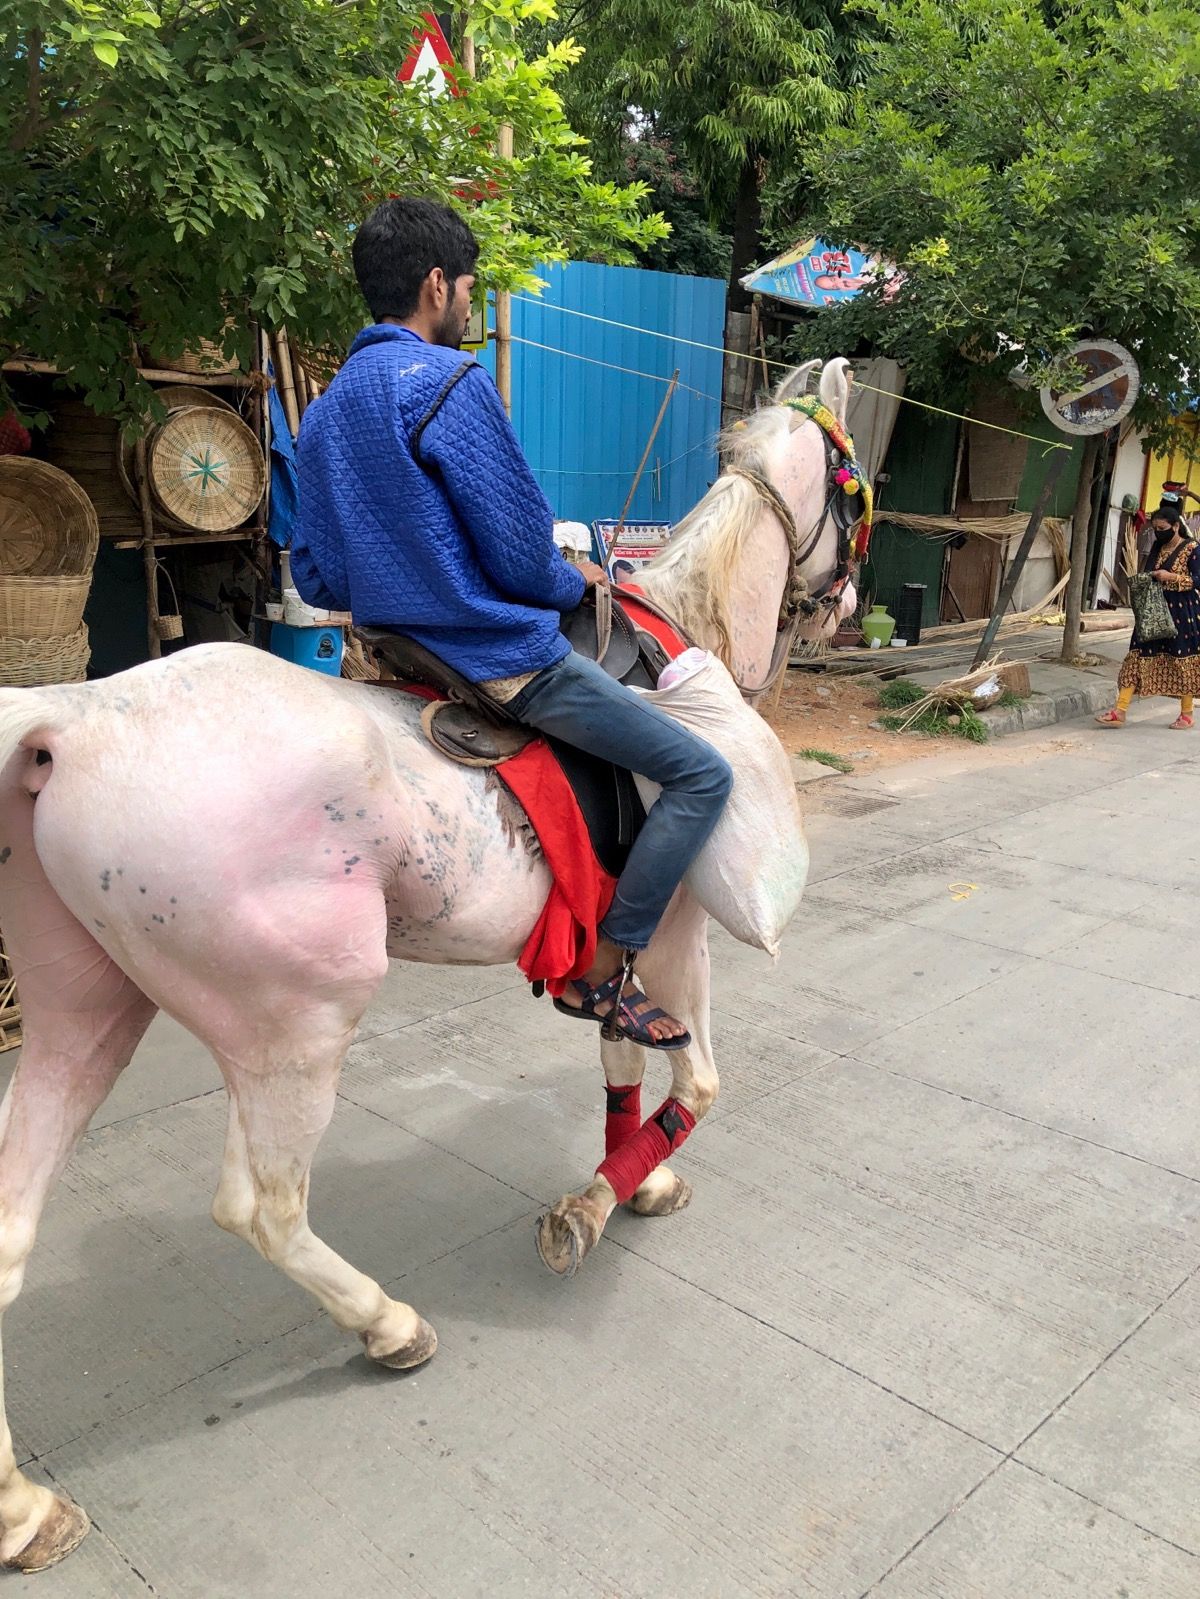 Horse mobility